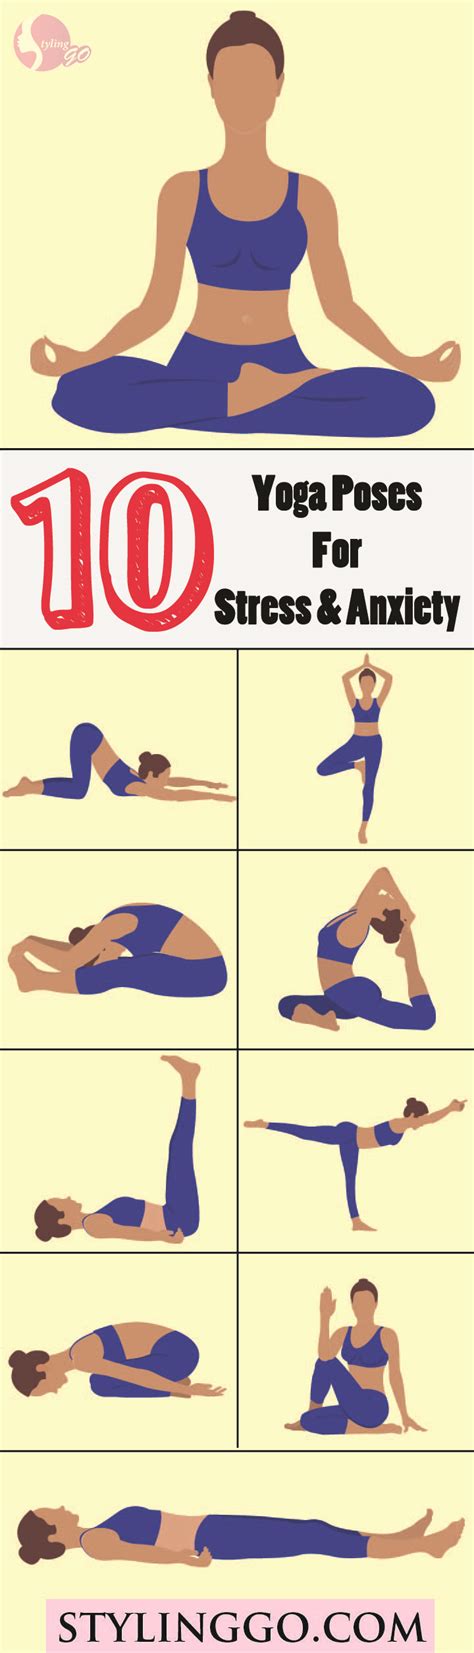 Top 10 Yoga Poses For Stress And Anxiety